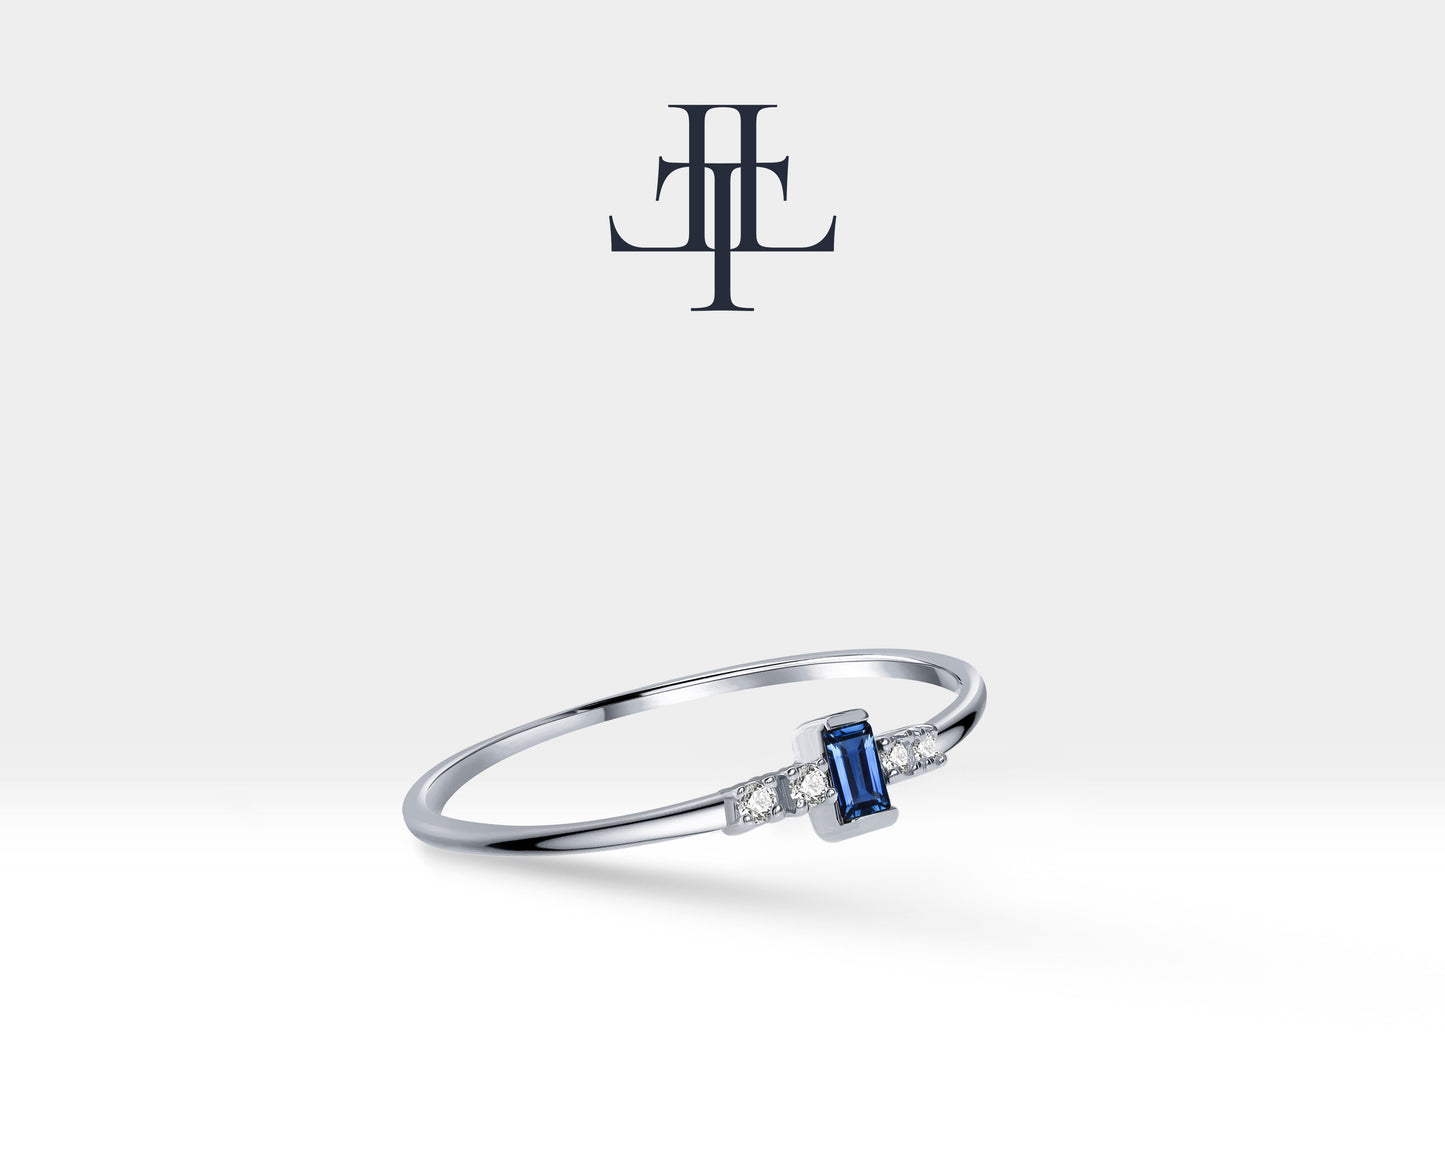 14K Yellow Solid Gold Band,Baguette Cut Sapphire and Diamond Ring,Straight Shank Dainty Gold Ring